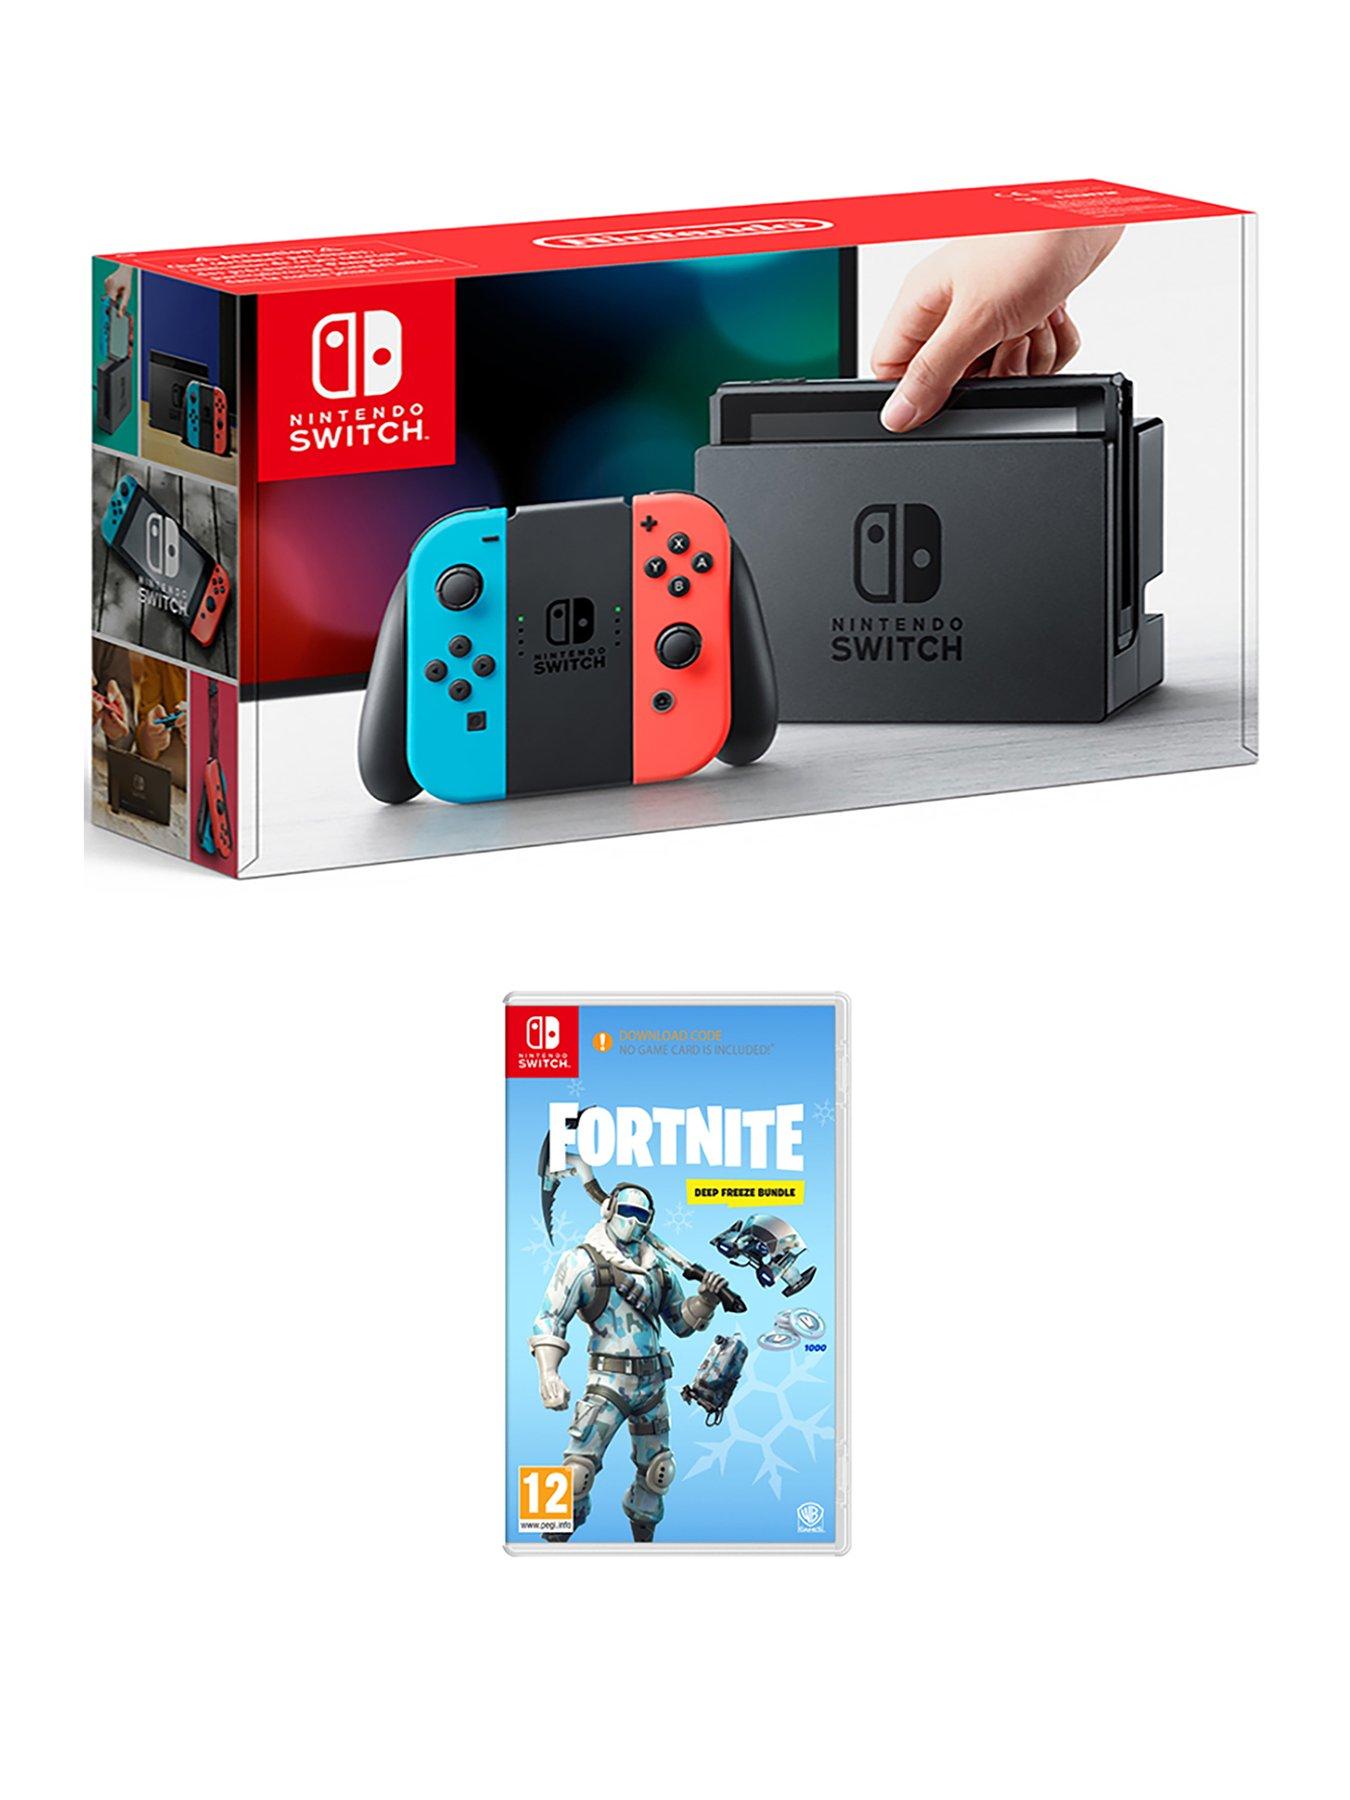 nintendo switch neon console with fortnite deep freeze bundle - how to play fortnite without wifi on nintendo switch